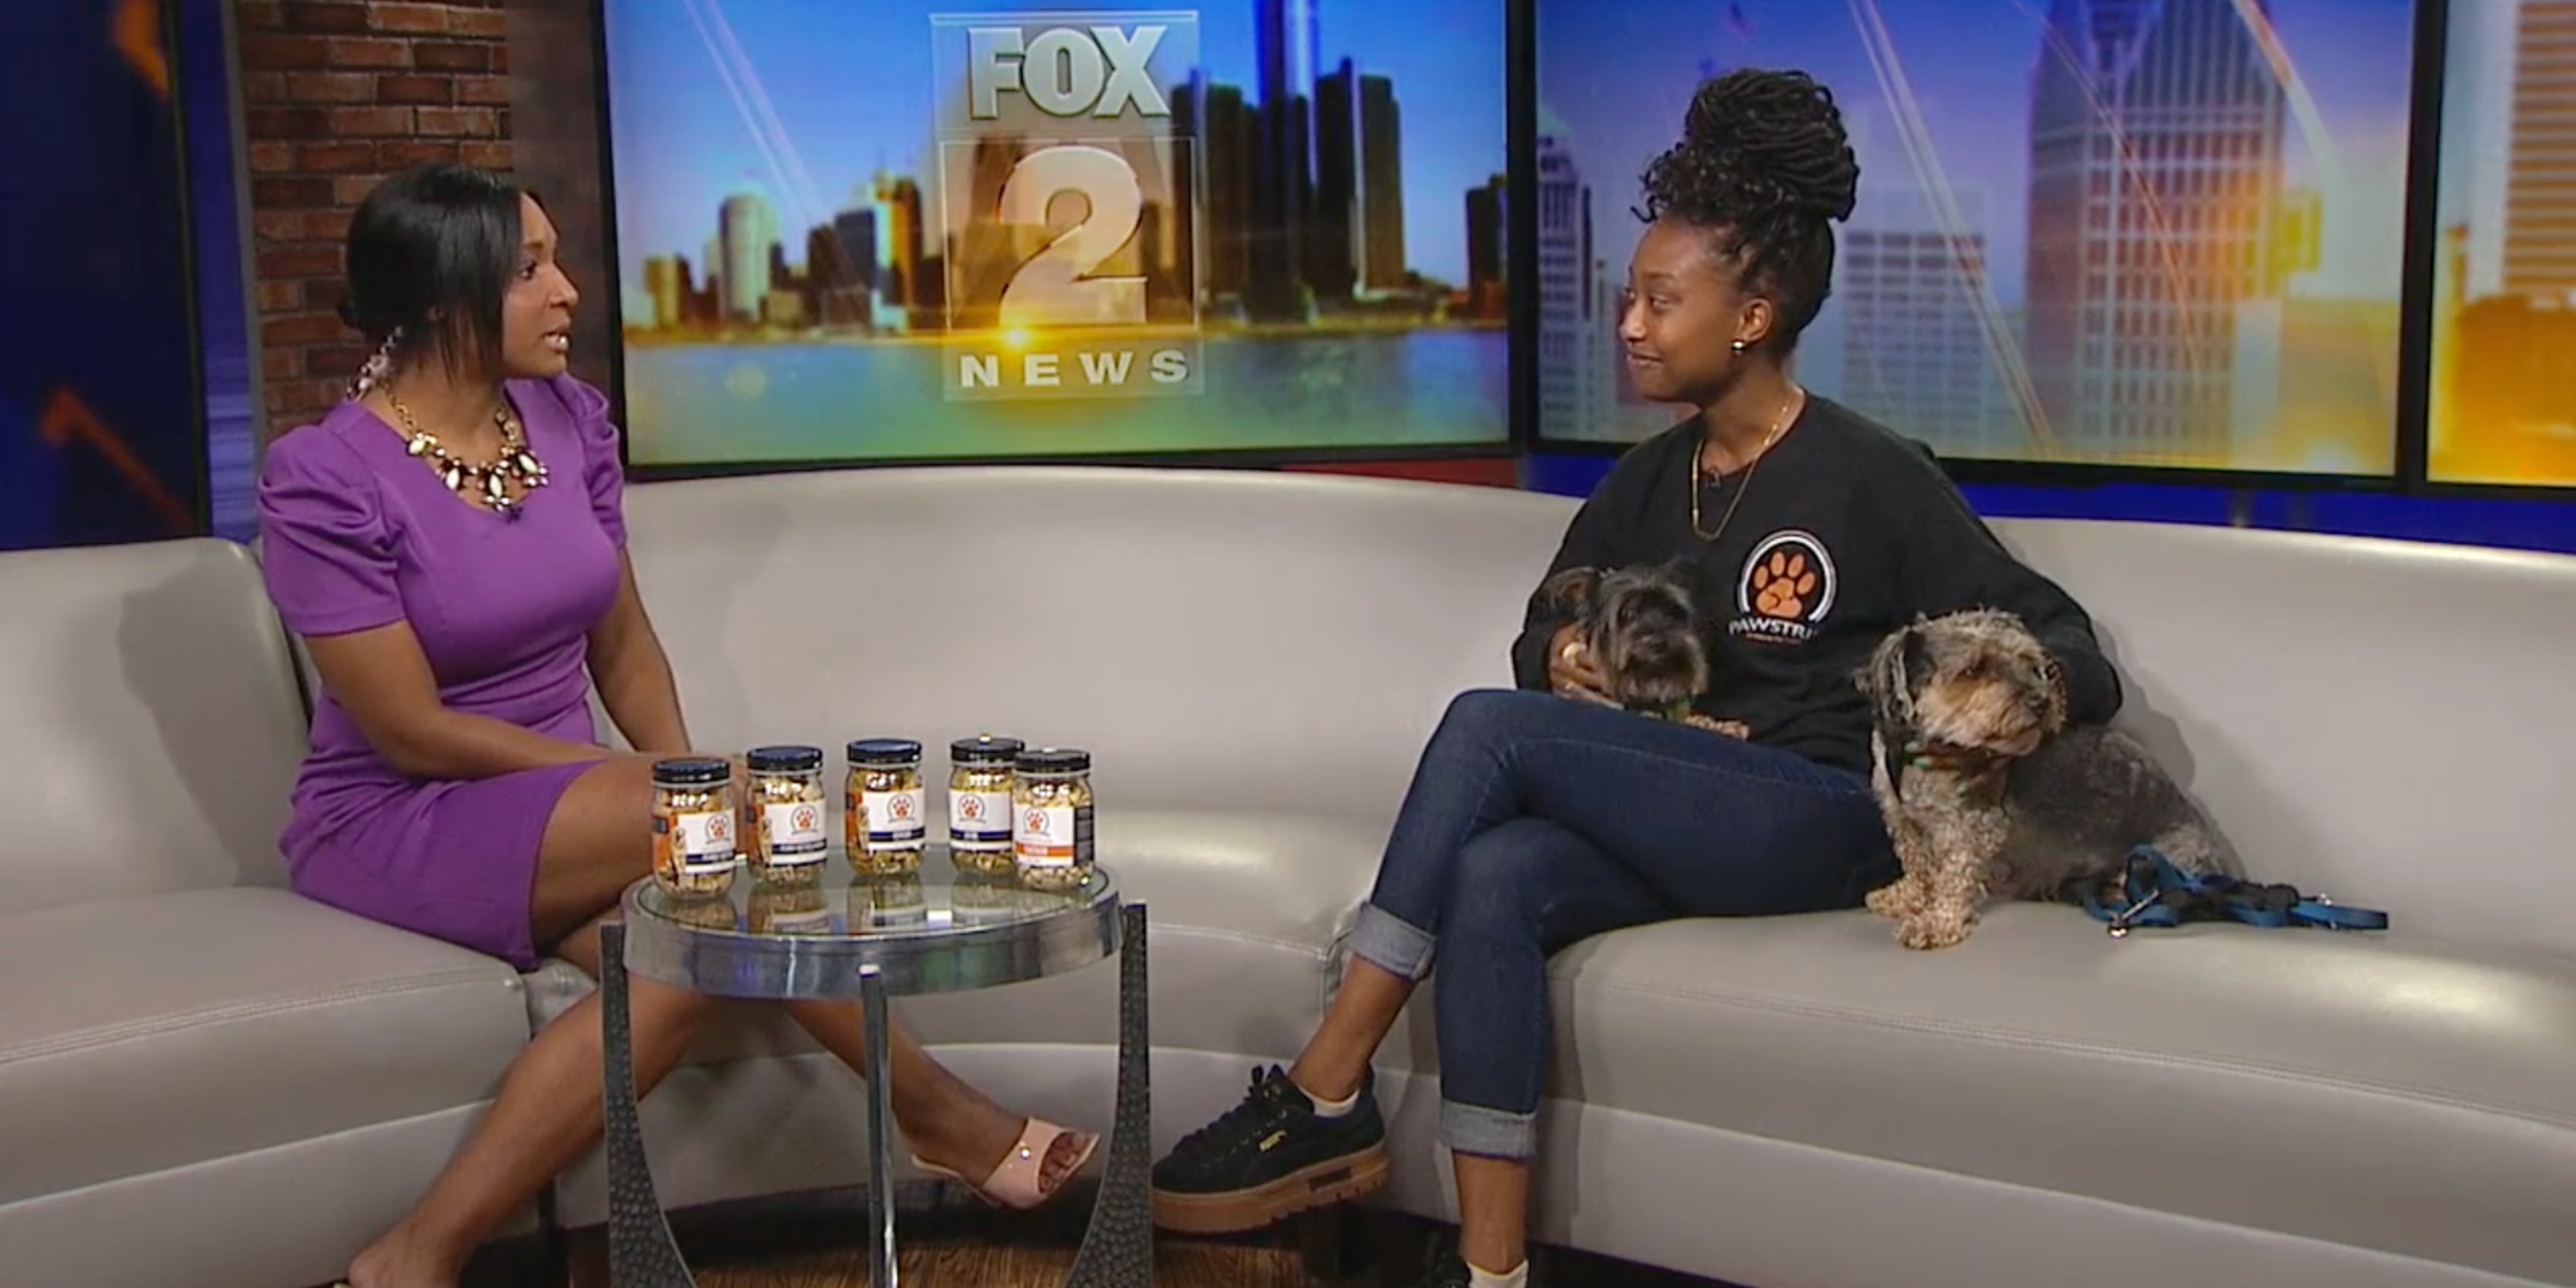 Load video: Pawstries owner Treasure Crocker featured on Fox 2 News with her two dogs